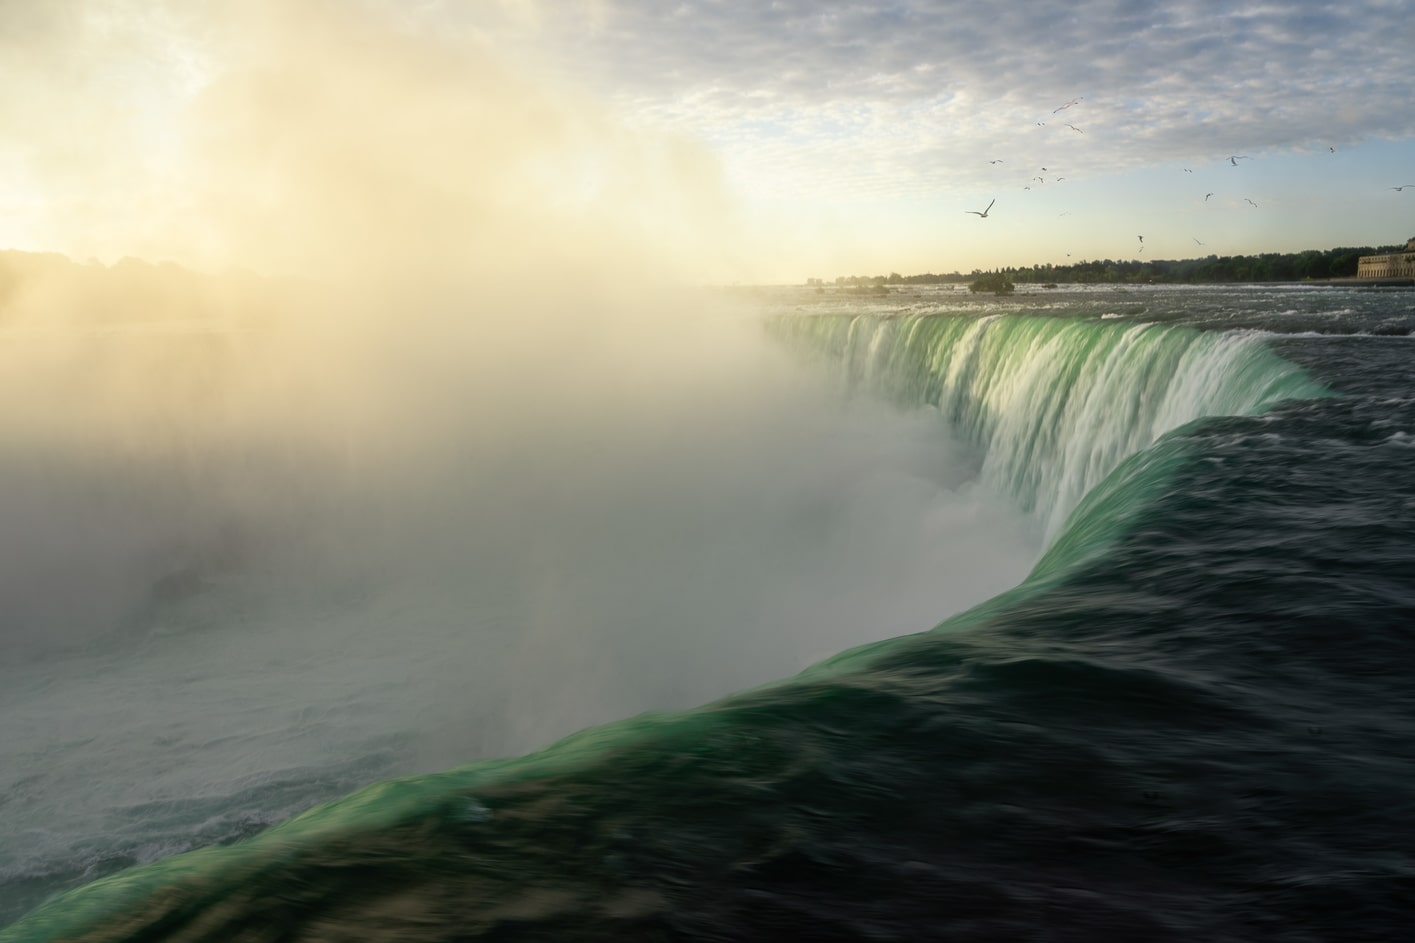 How to get from Niagara Falls’ Canadian side to the U.S. side